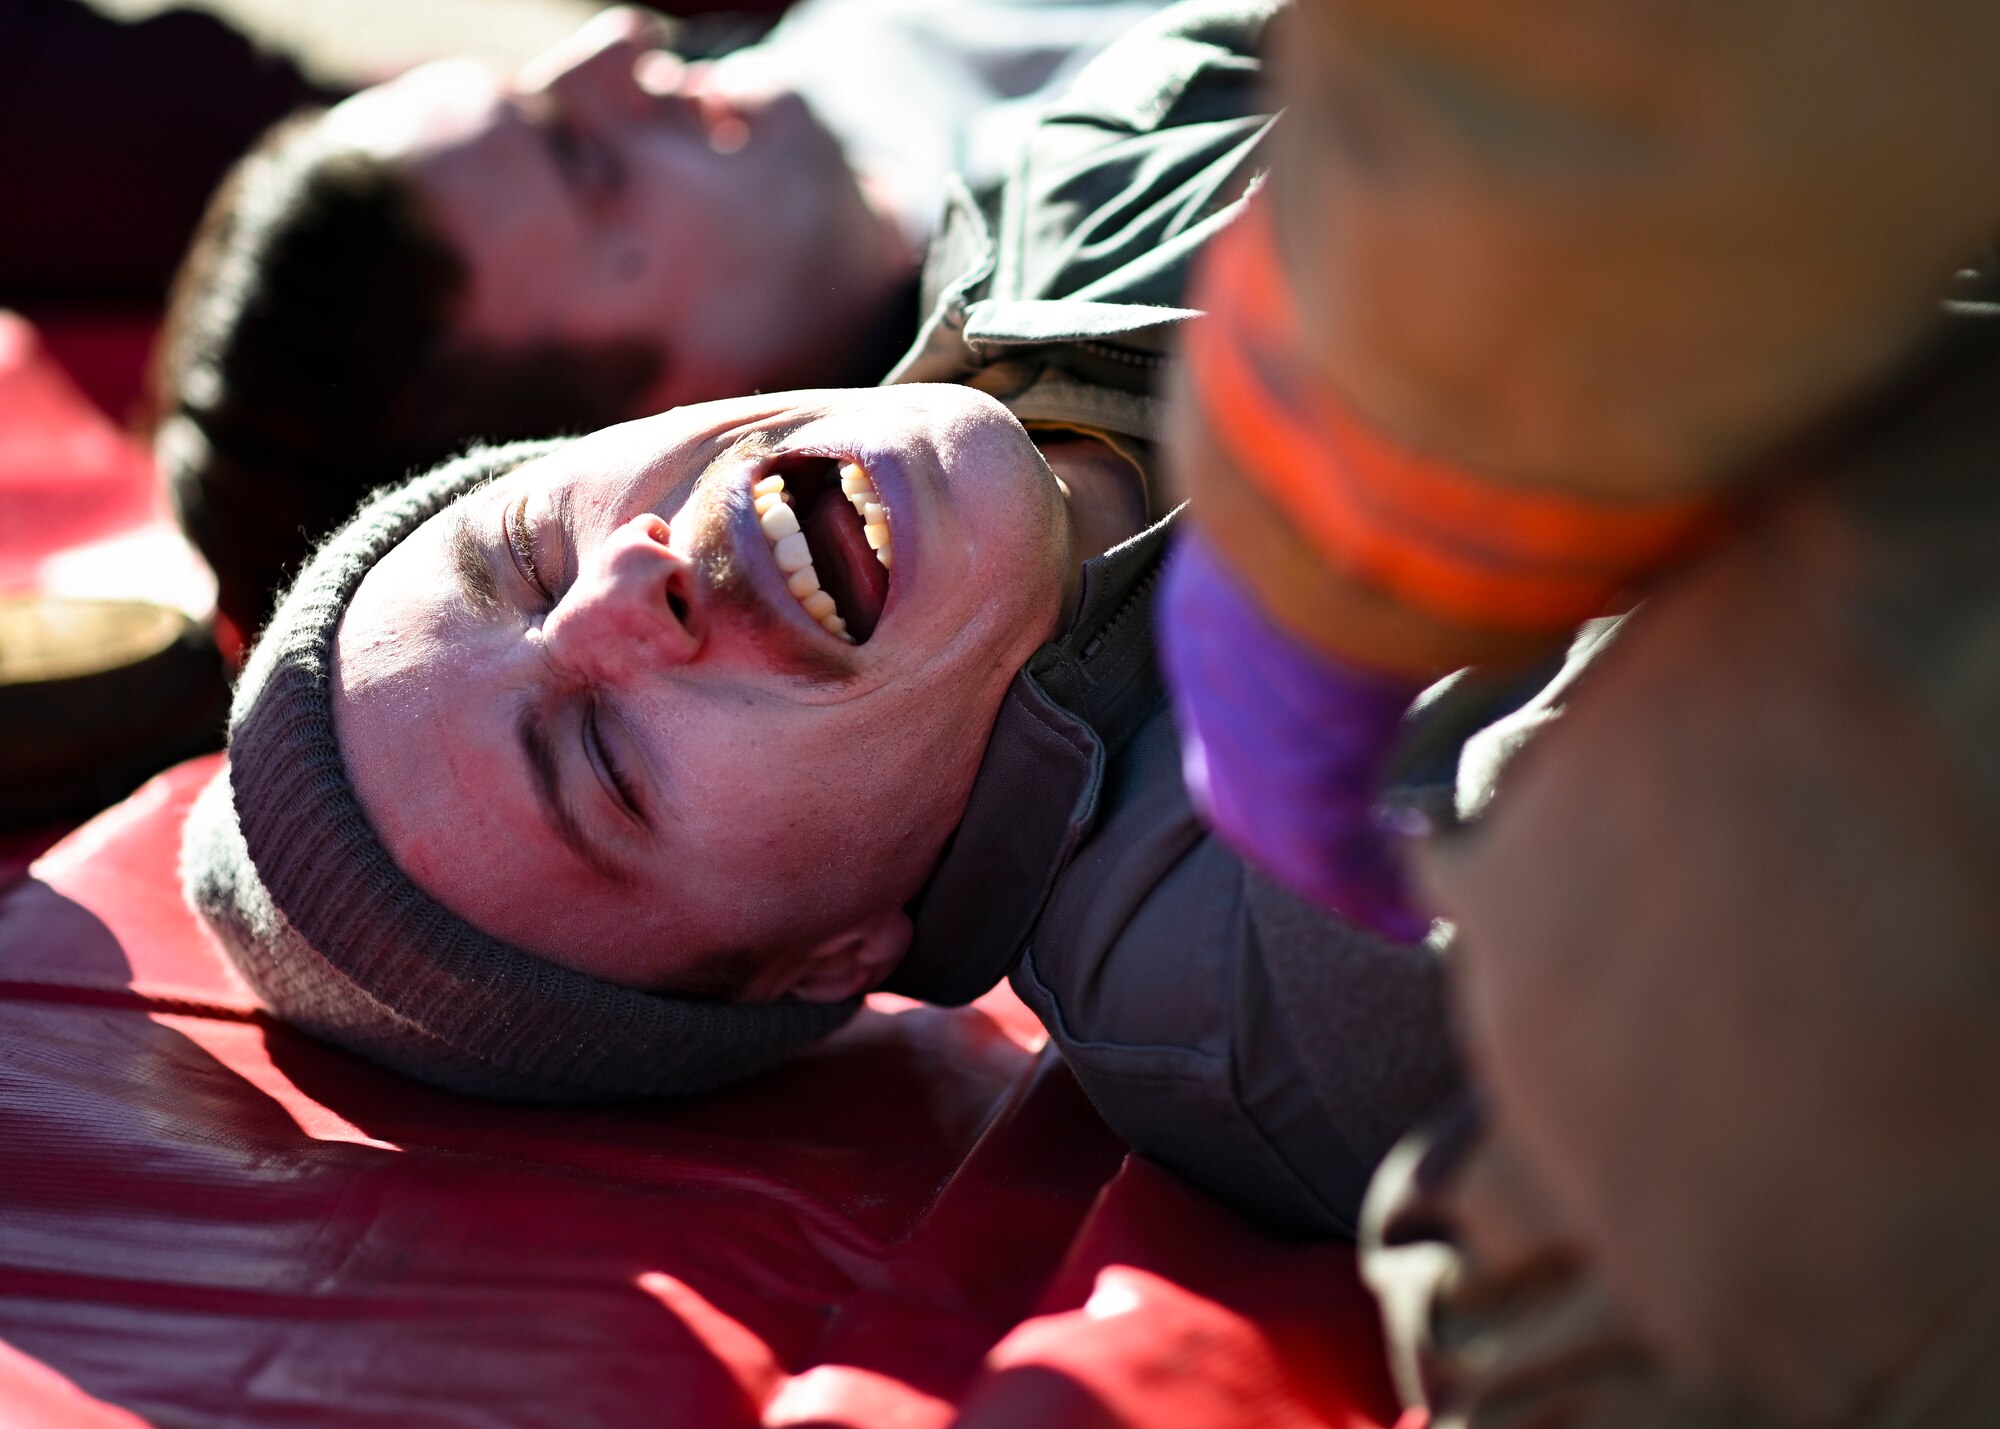 A volunteer yells out in pain during a mass casualty exercise at Shaw Air Force Base, South Carolina, Jan. 19, 2022. The exercise involved a three vehicle collision with simulated injuries and 19 volunteers acting as if they were in the accident. (U.S. Air Force photo by Senior Airman Madeline Herzog)